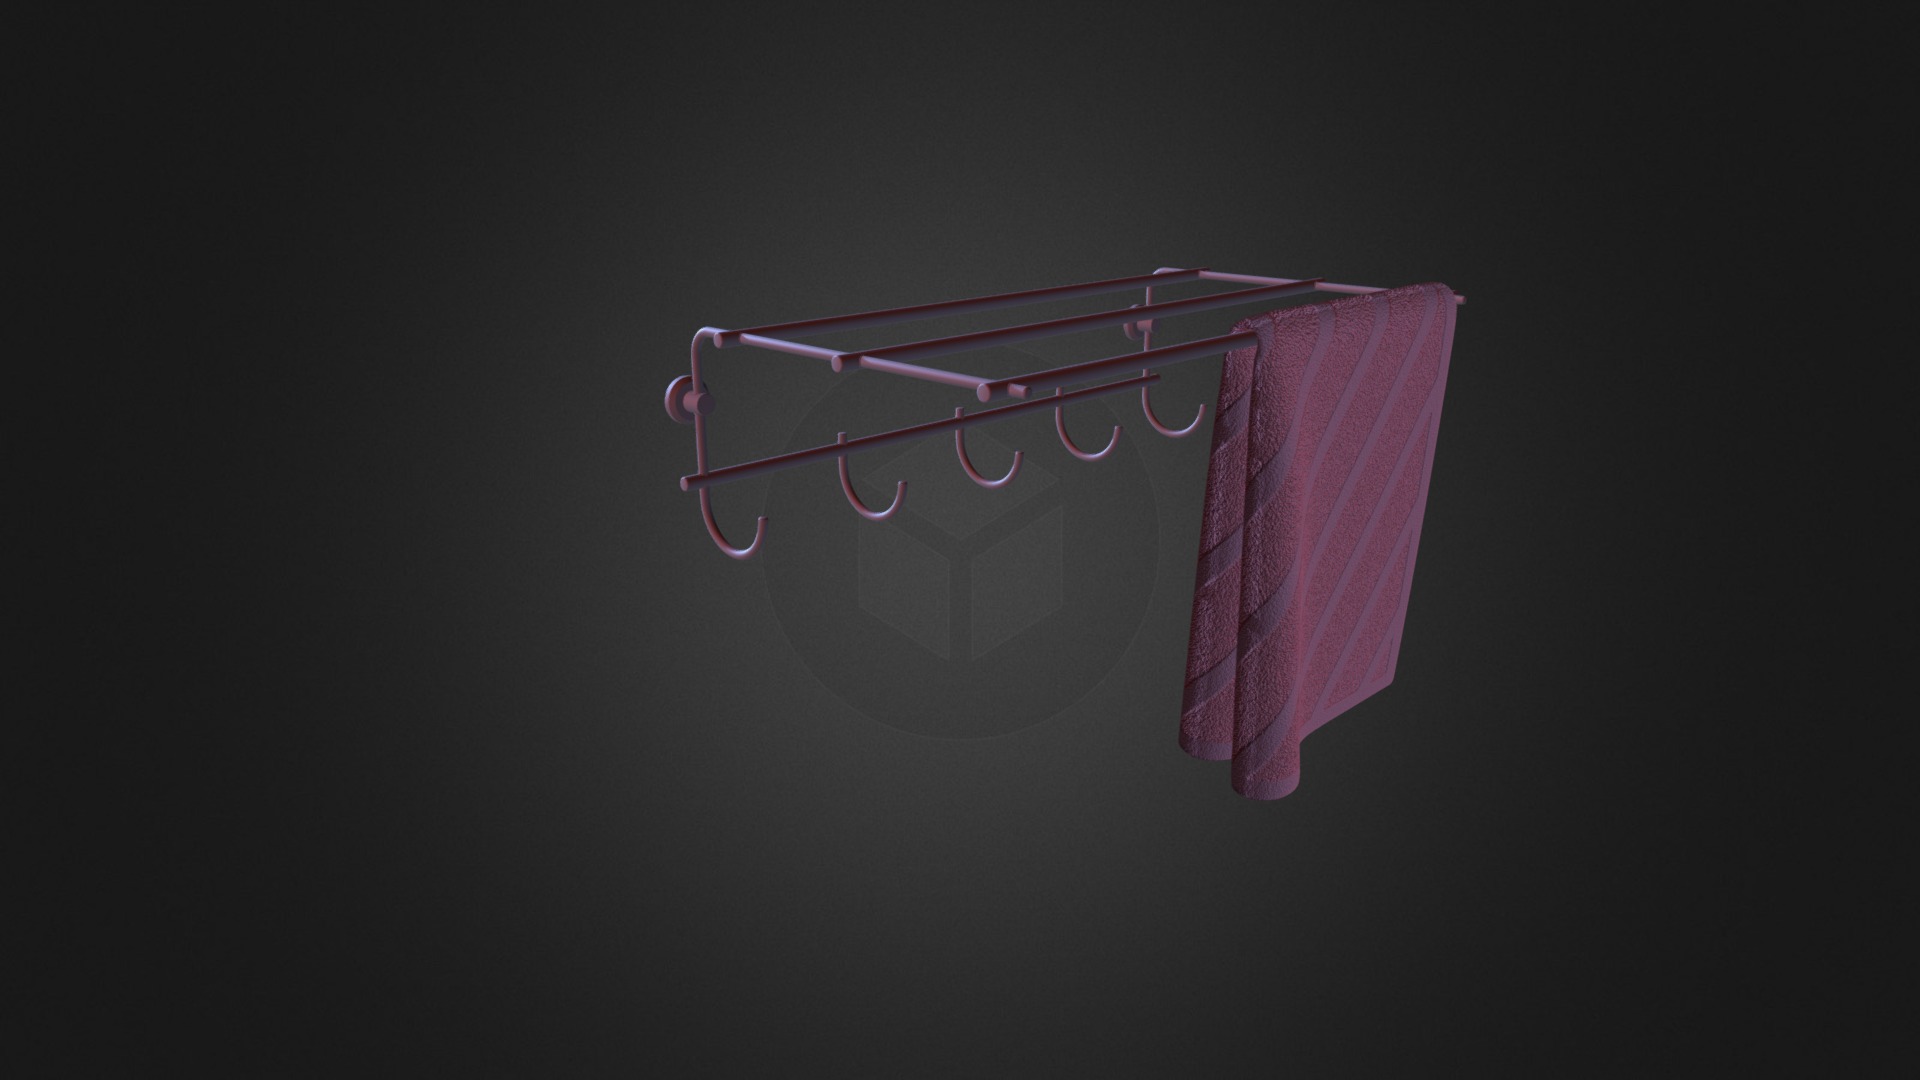 3D model Wall Towel Hanger - This is a 3D model of the Wall Towel Hanger. The 3D model is about a pink and white paper with a symbol on it.